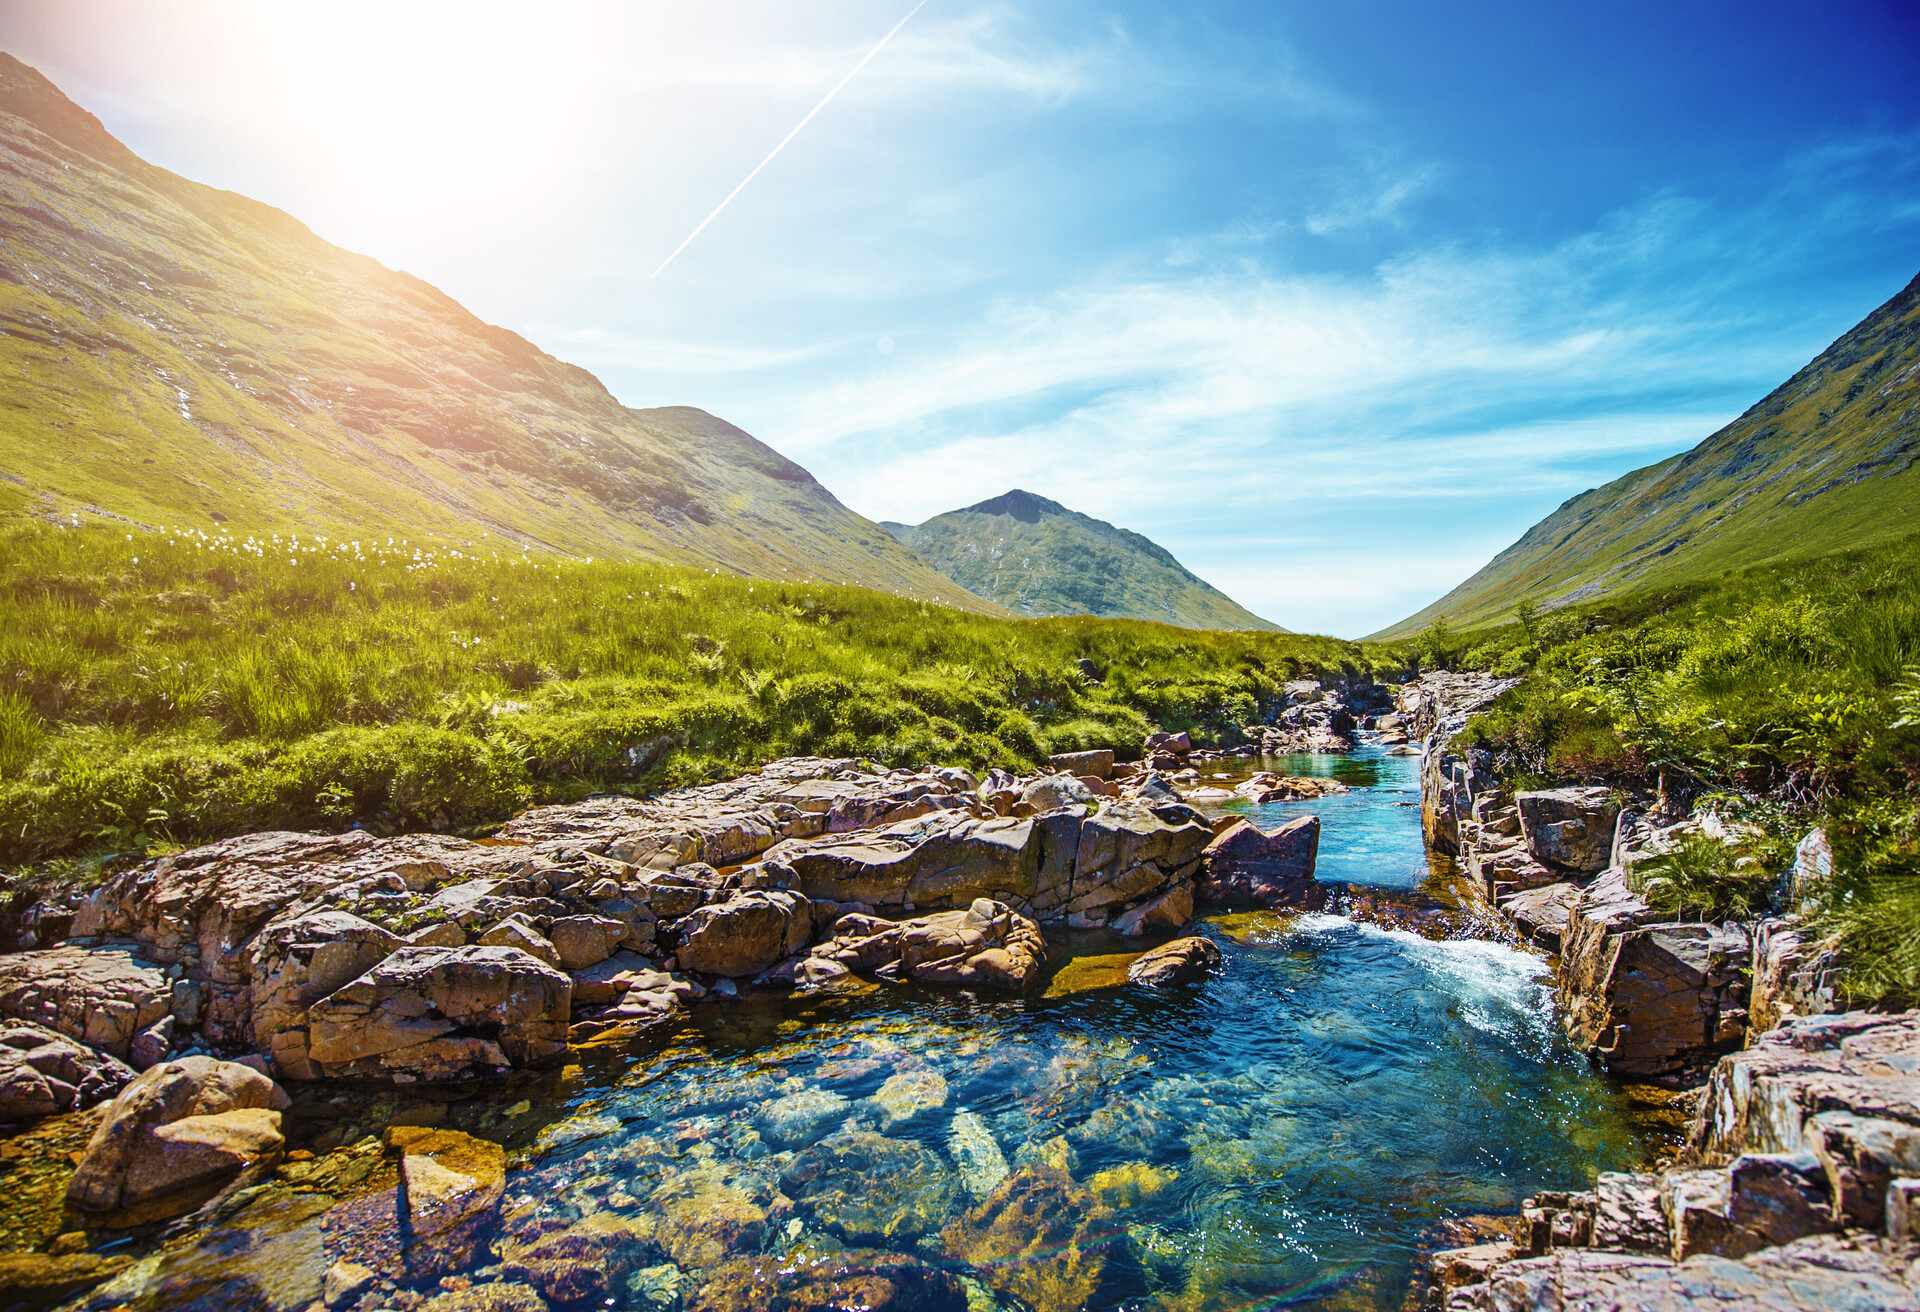 Idyllic scene with mountains and stream (Buachaille Etive Mor and River Coupall, Glencoe, Highlands, Scotland, United Kingdom, Europe ) in Scottish Highlands near Glen Coe on a sunny day in summer